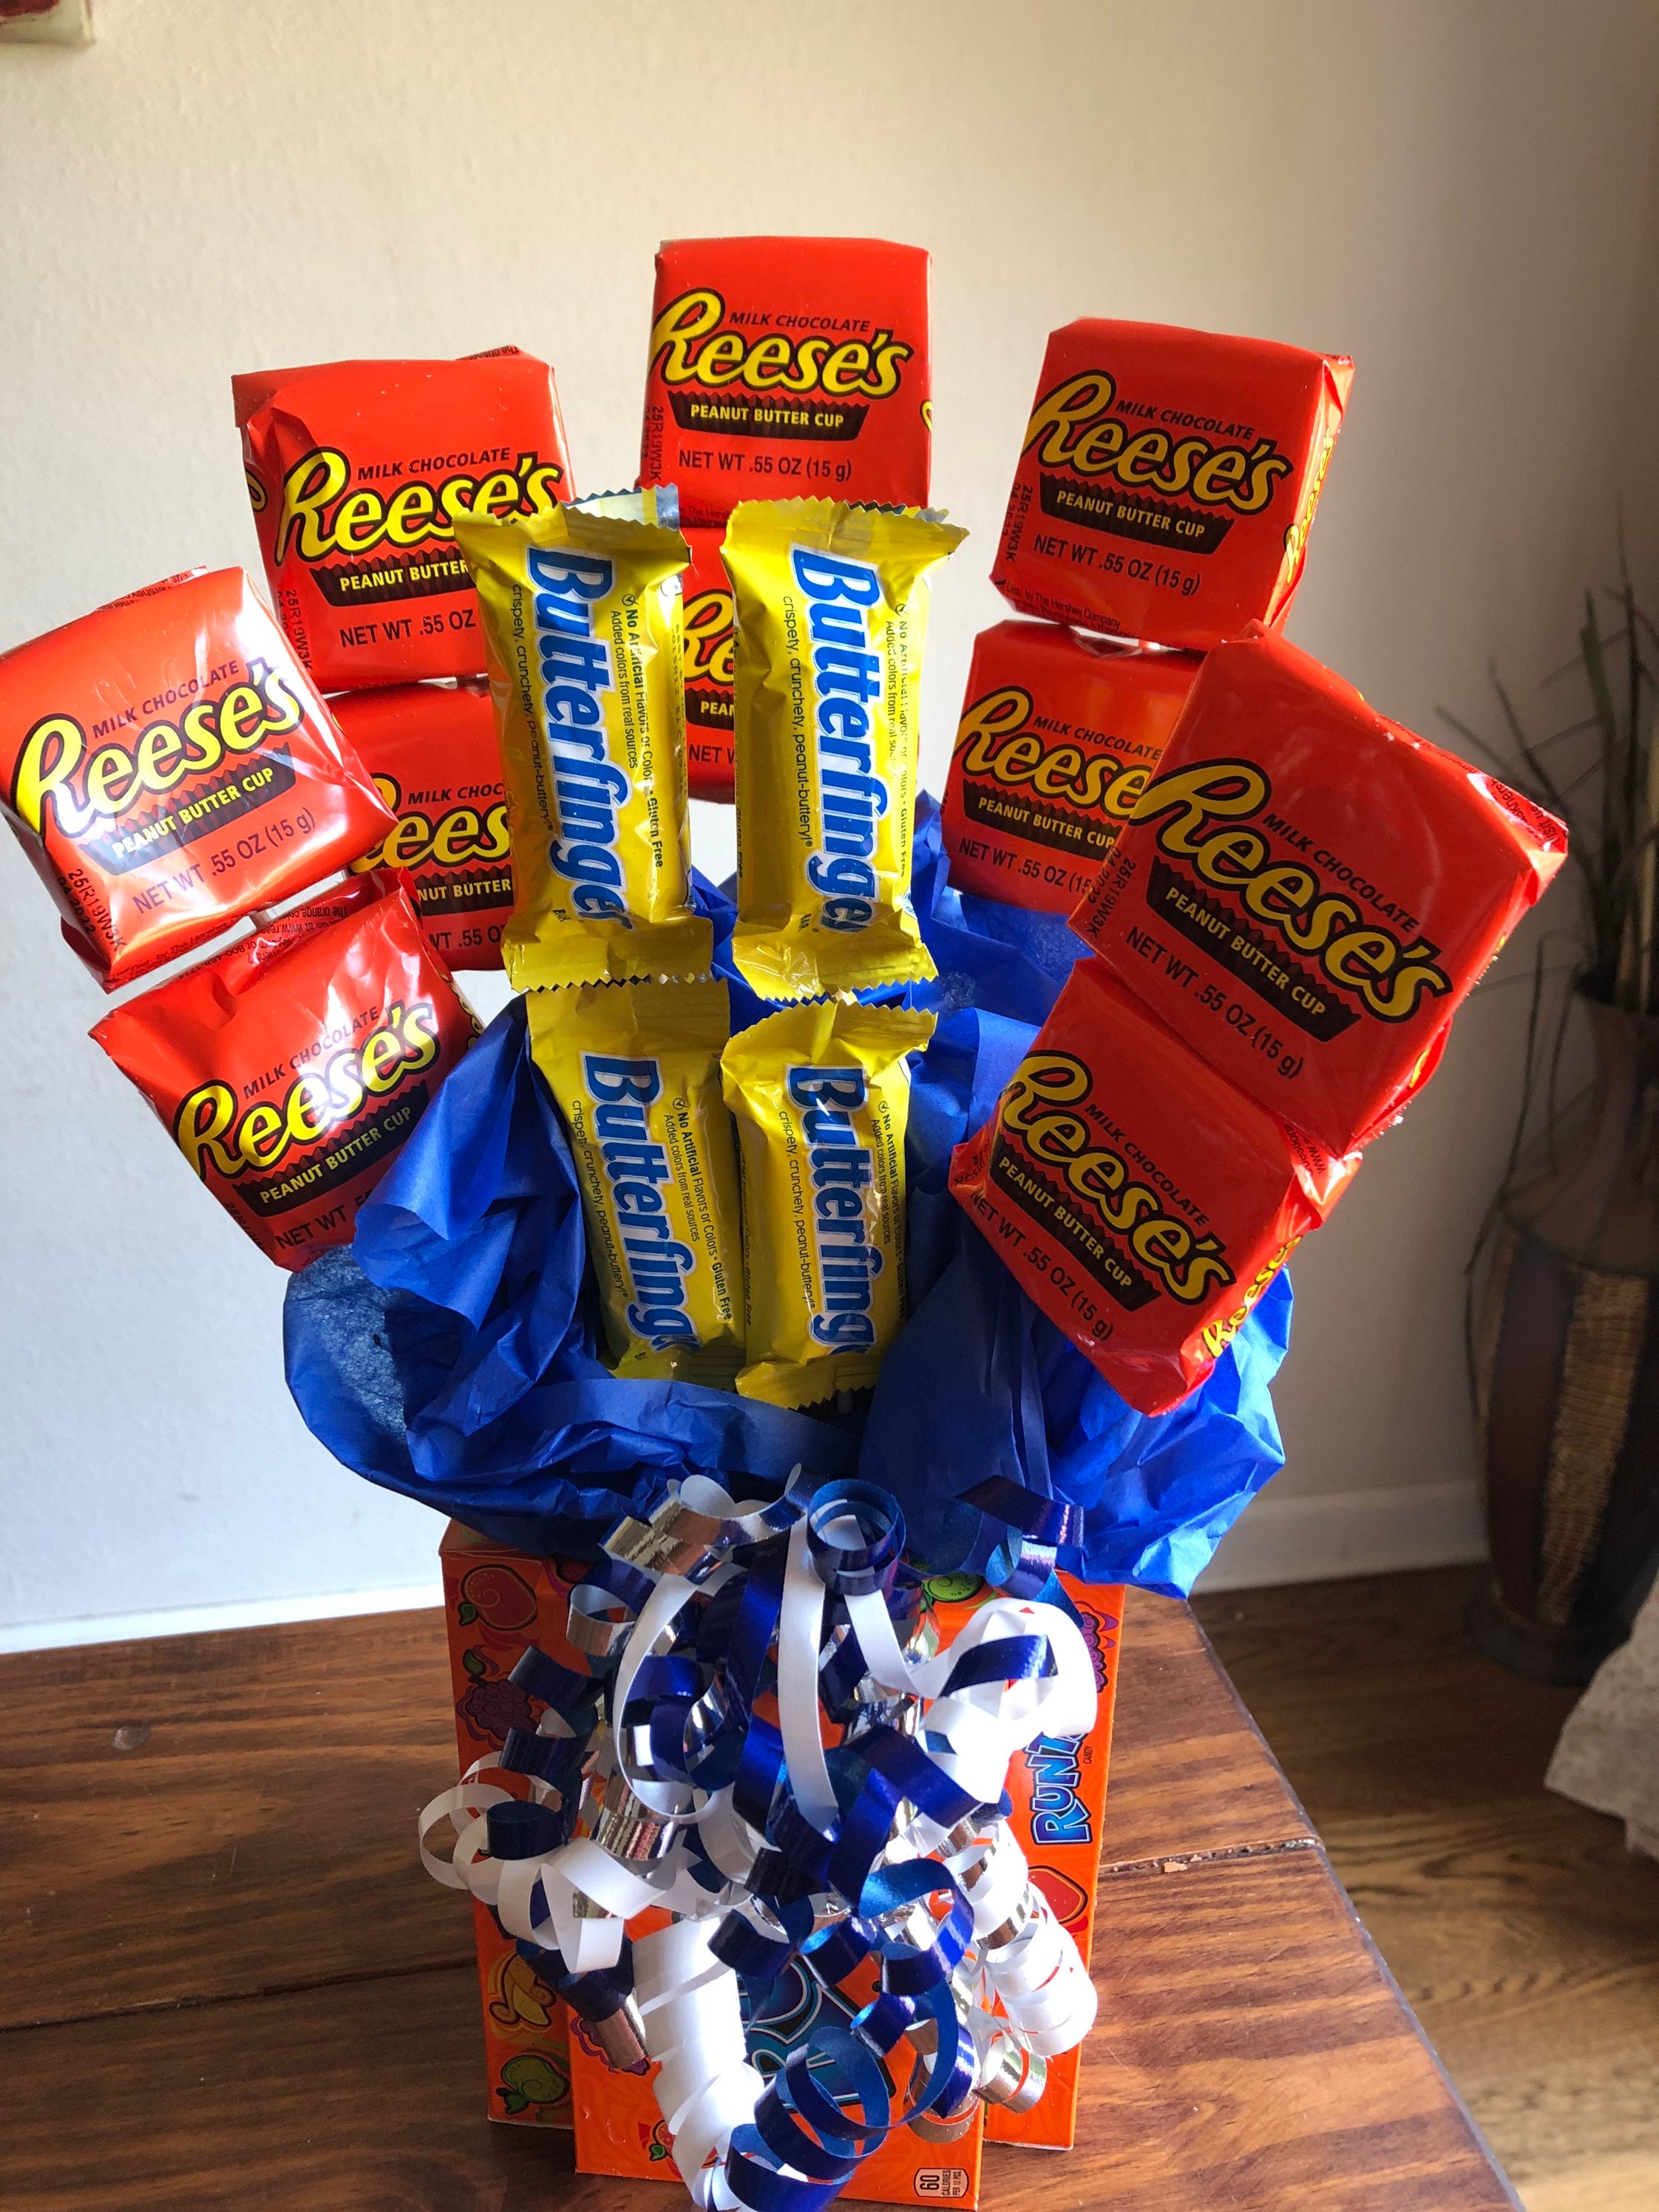 Reese's - Best gift for dad stocked fridge or sweet tie?